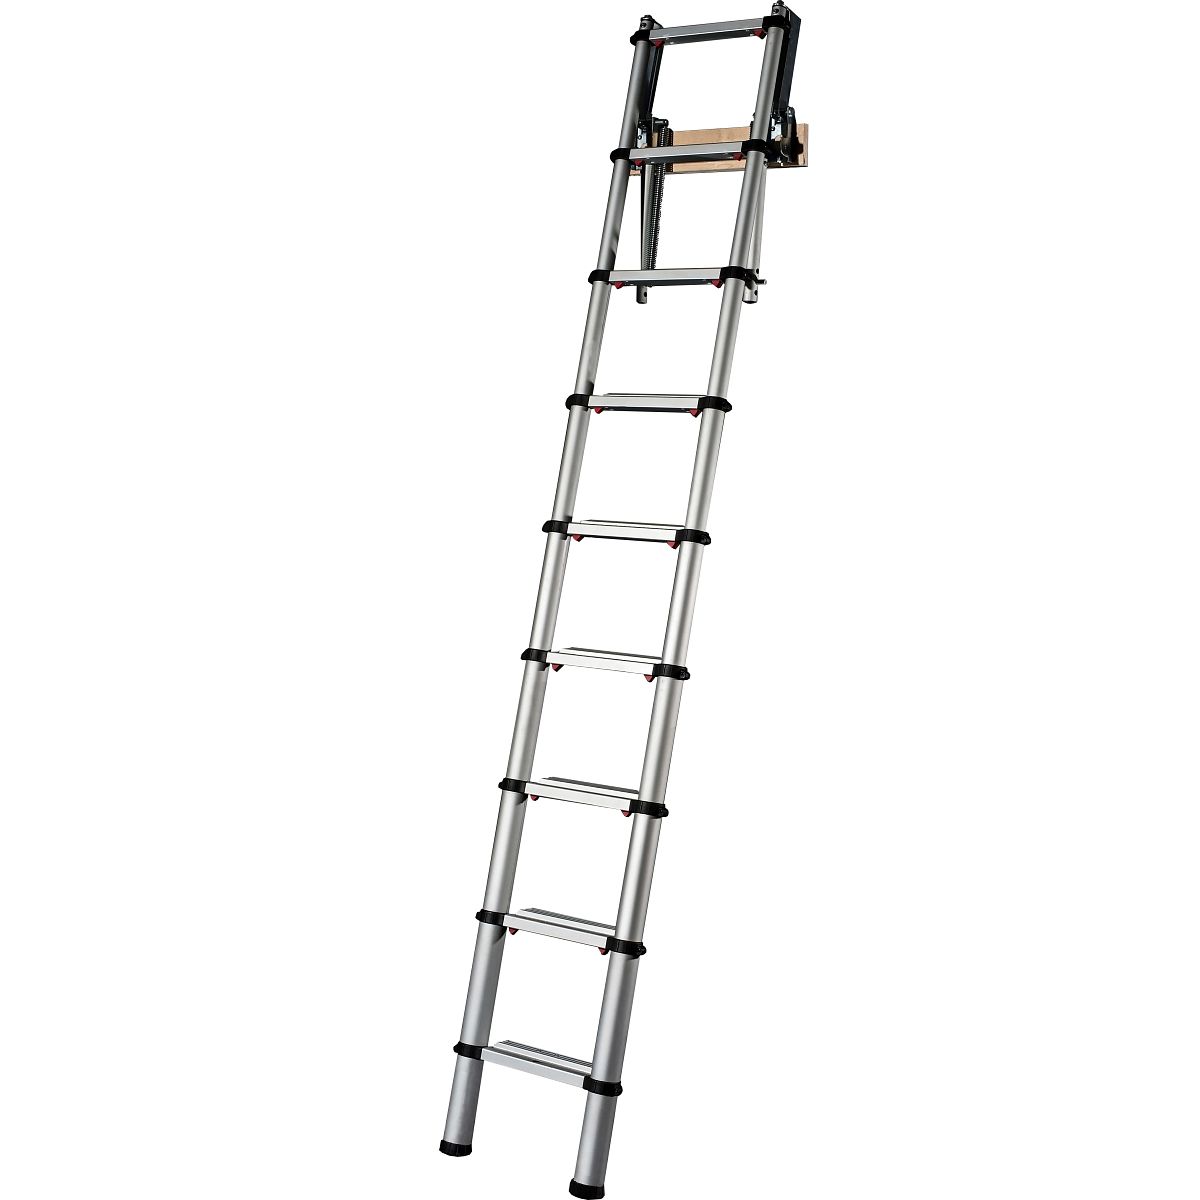 30100000 | Loft Ladders | Youngman Ladders and Access Equipment